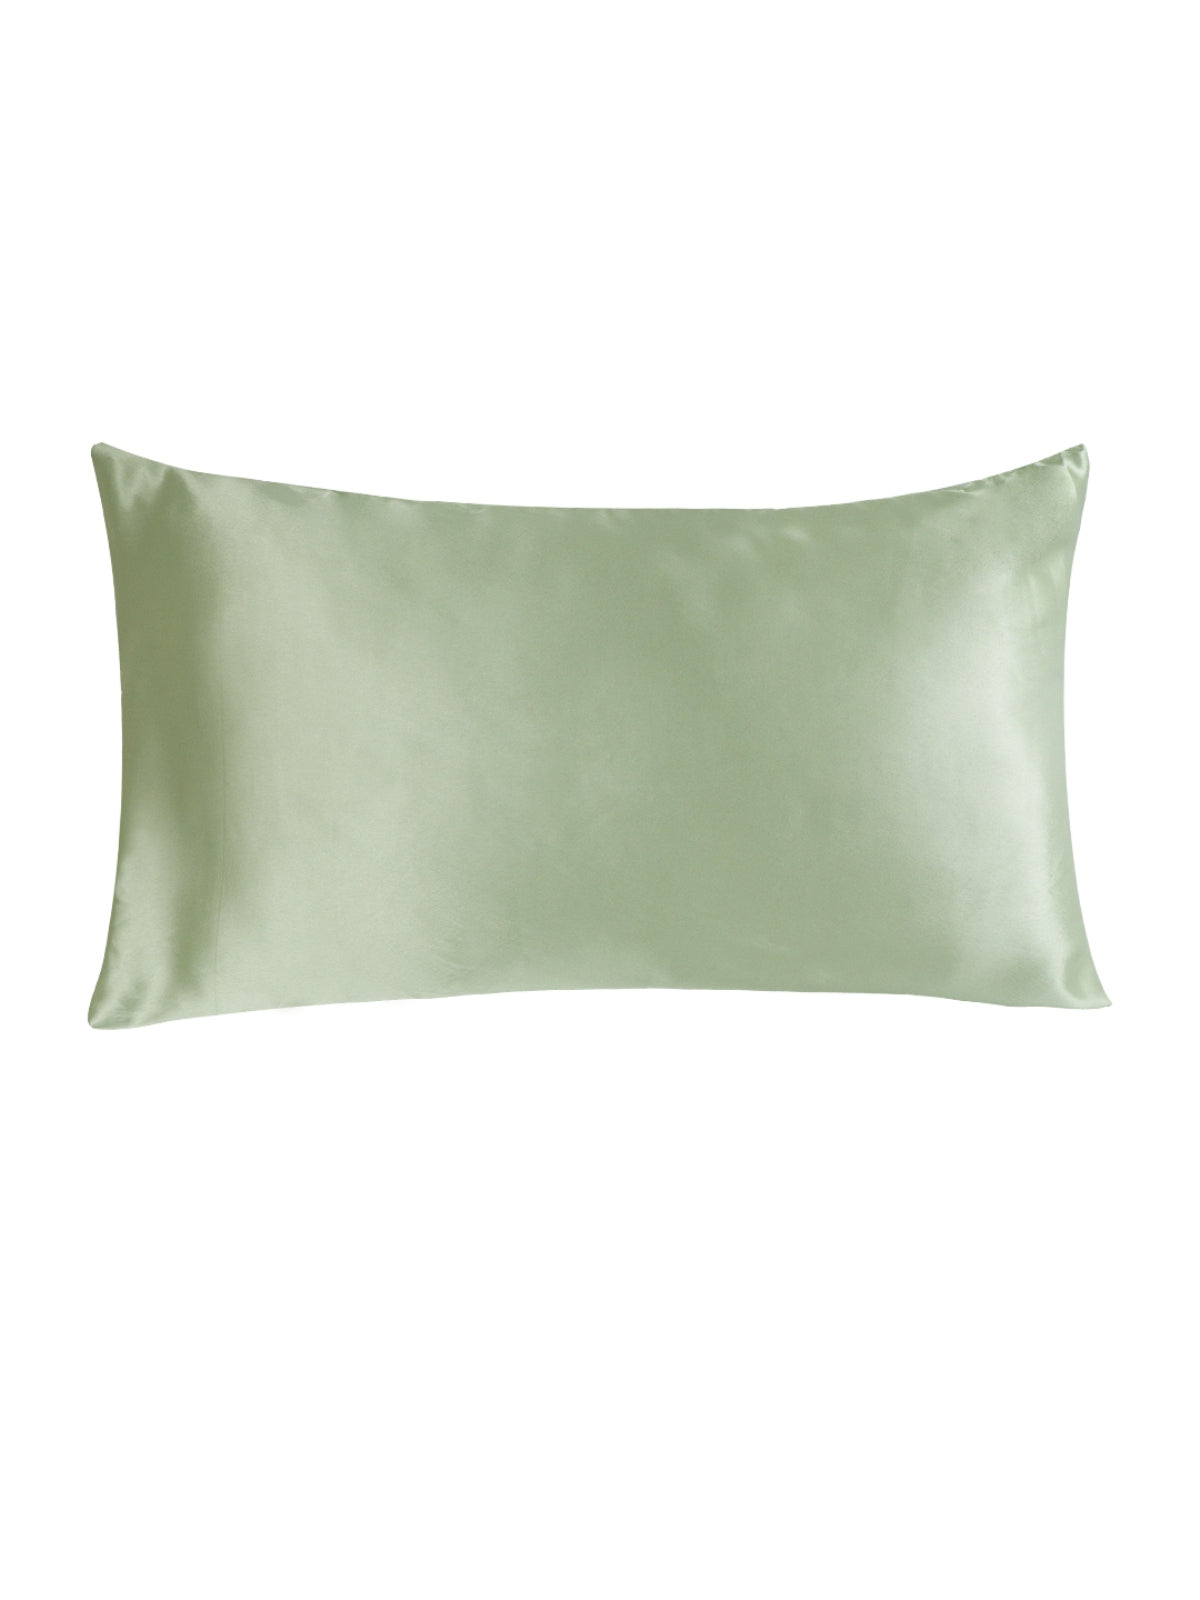 Green Set of 2 Solid Patterned Pillow Covers